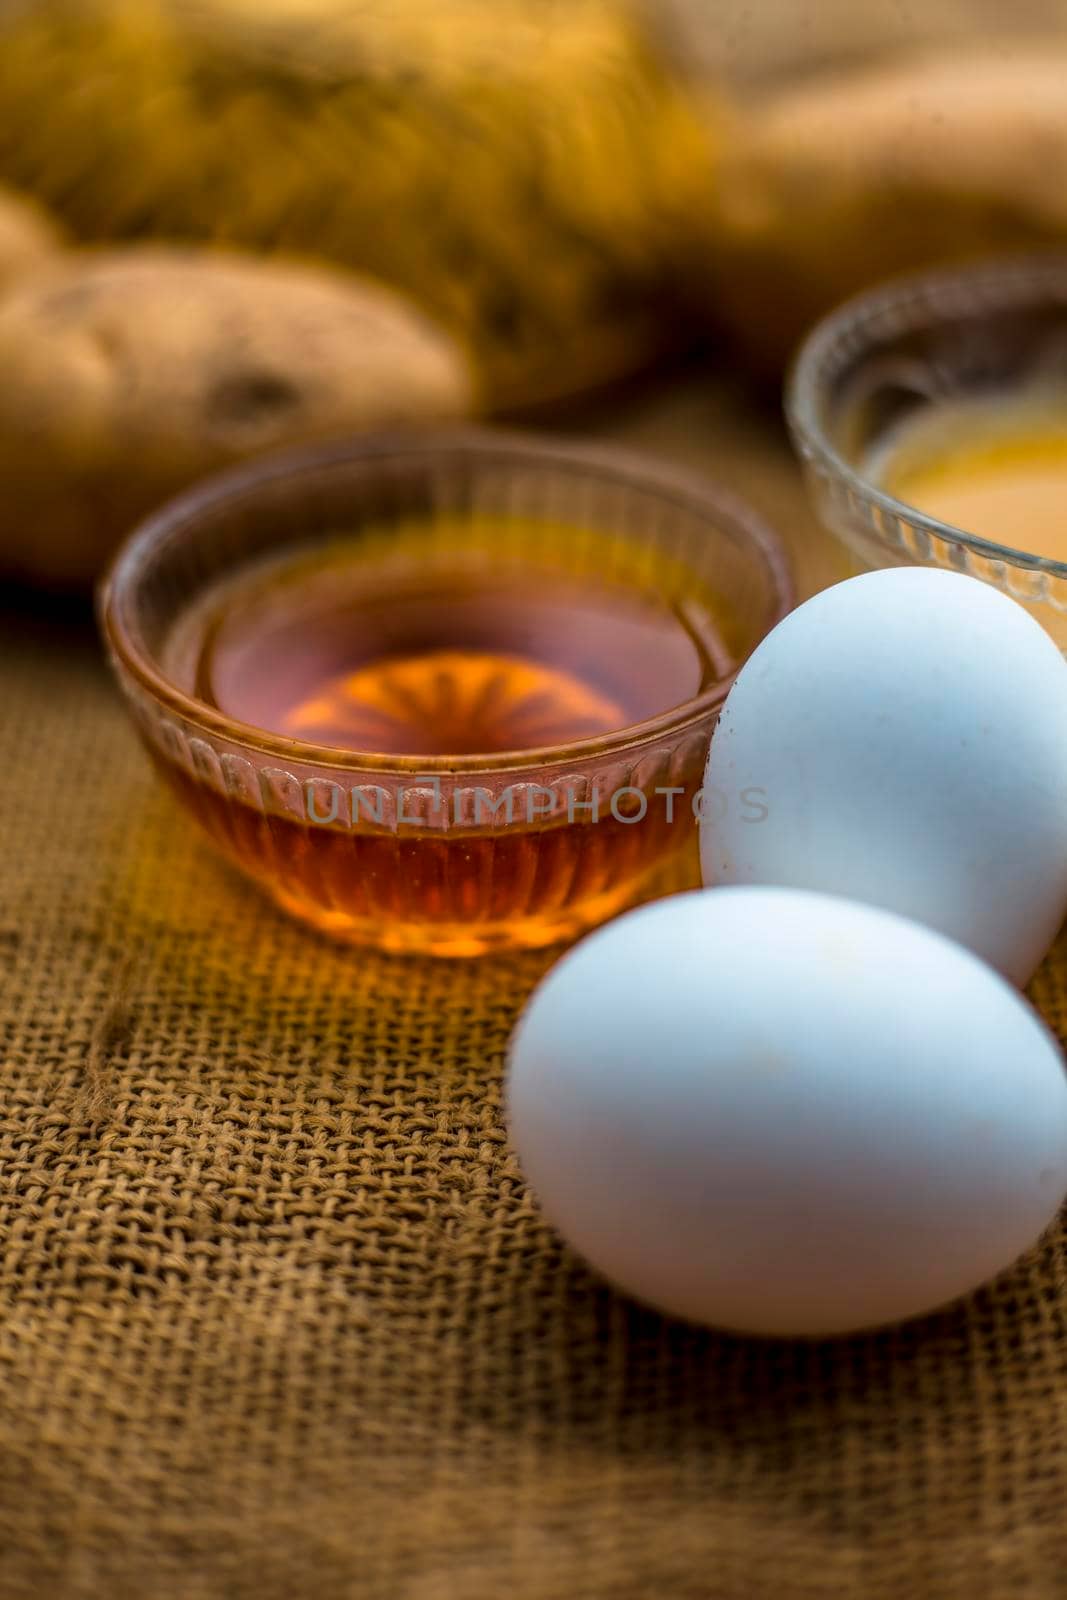 All-rounder hair growth remedy which will act as a conditioner as well as a hair growth promoter i.e. Potato juice well mixed with honey and egg yolk.